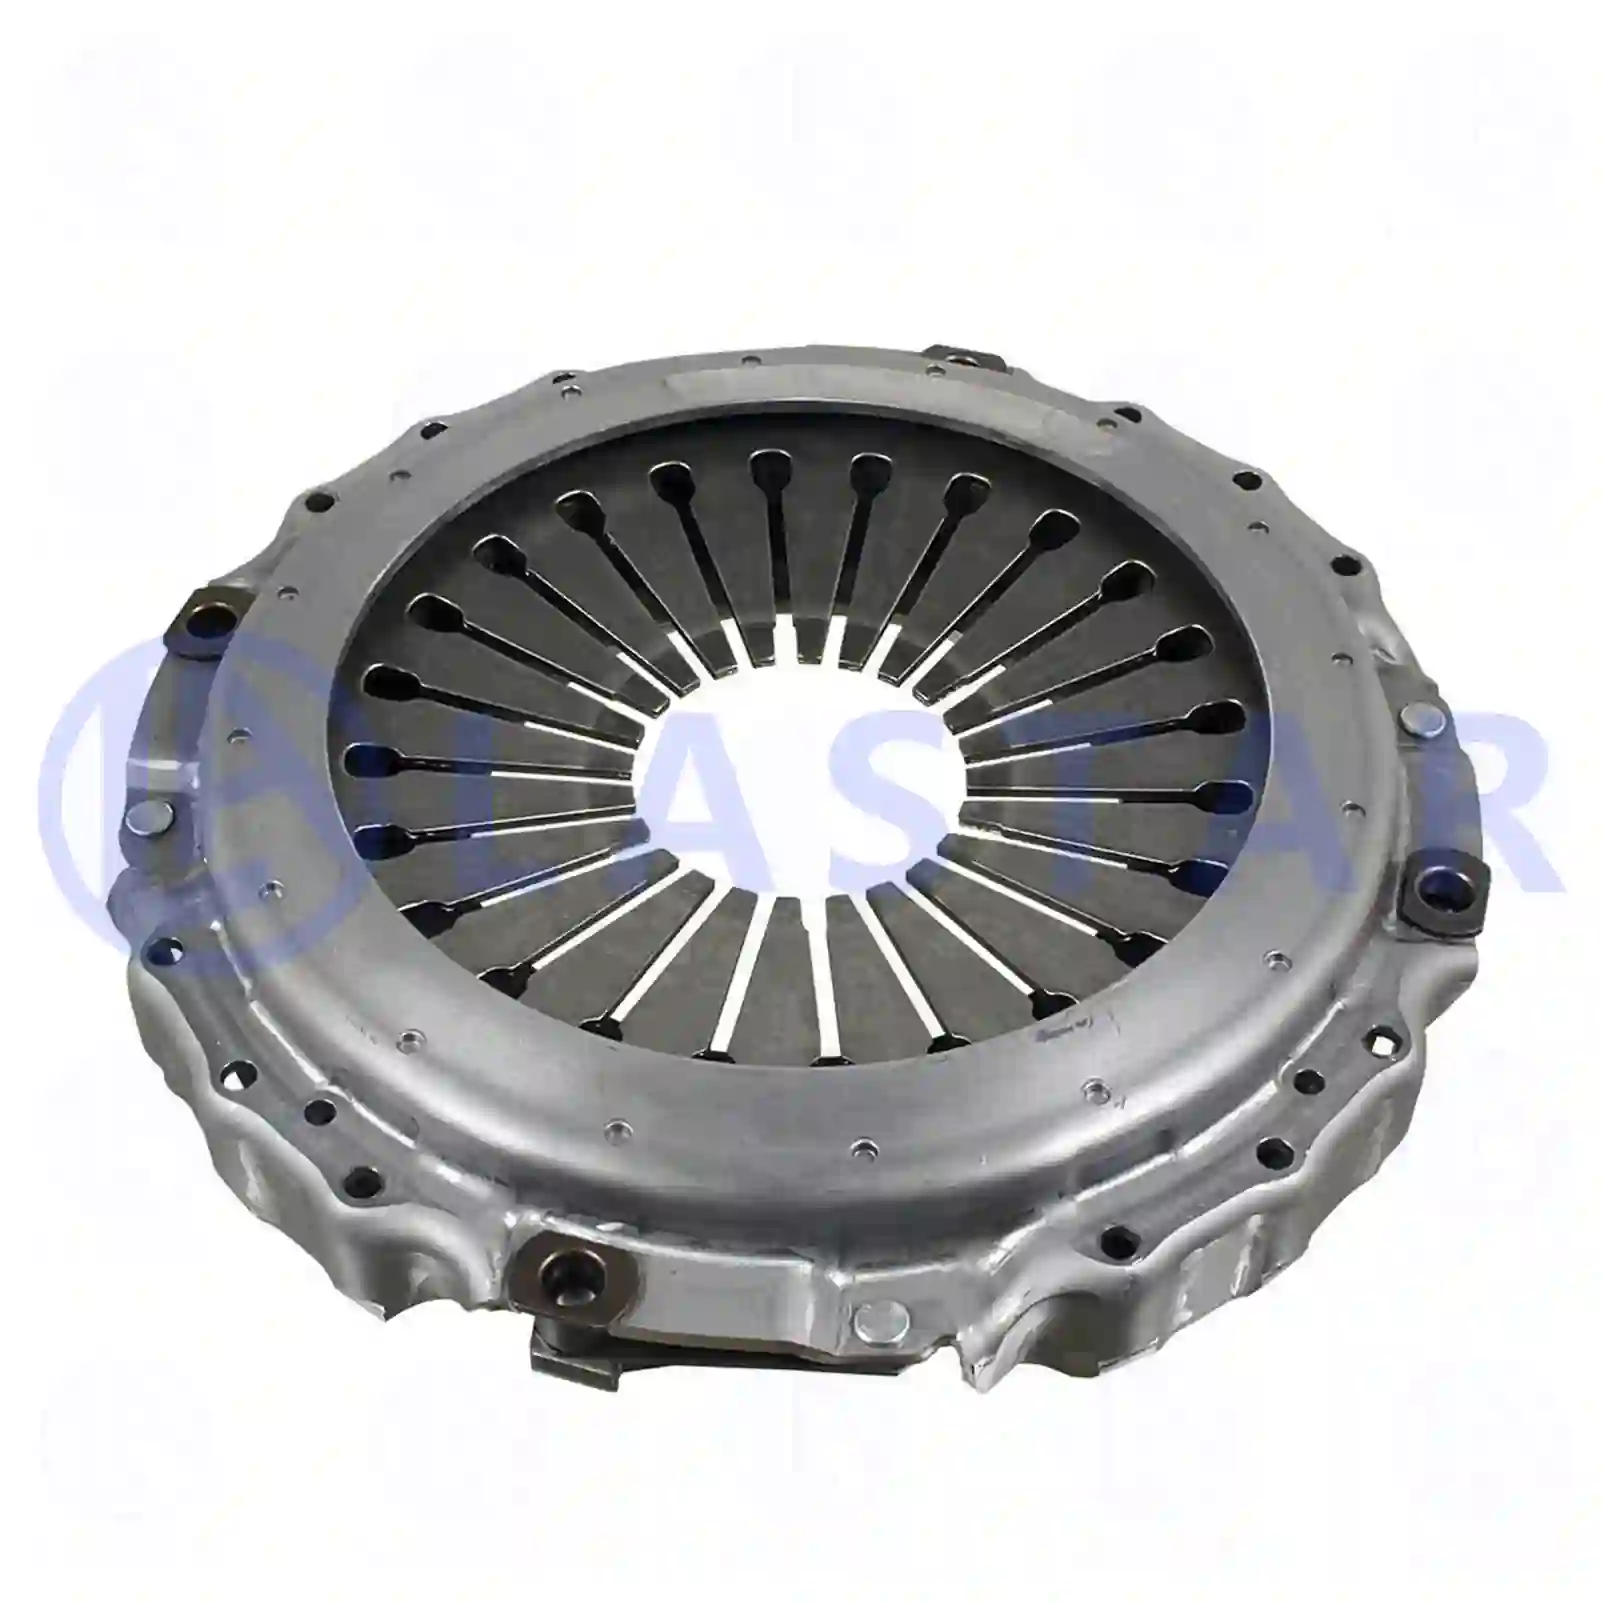 Clutch cover, 77722259, 1521718, 1668919, 20510799, 8112598, 85000125 ||  77722259 Lastar Spare Part | Truck Spare Parts, Auotomotive Spare Parts Clutch cover, 77722259, 1521718, 1668919, 20510799, 8112598, 85000125 ||  77722259 Lastar Spare Part | Truck Spare Parts, Auotomotive Spare Parts